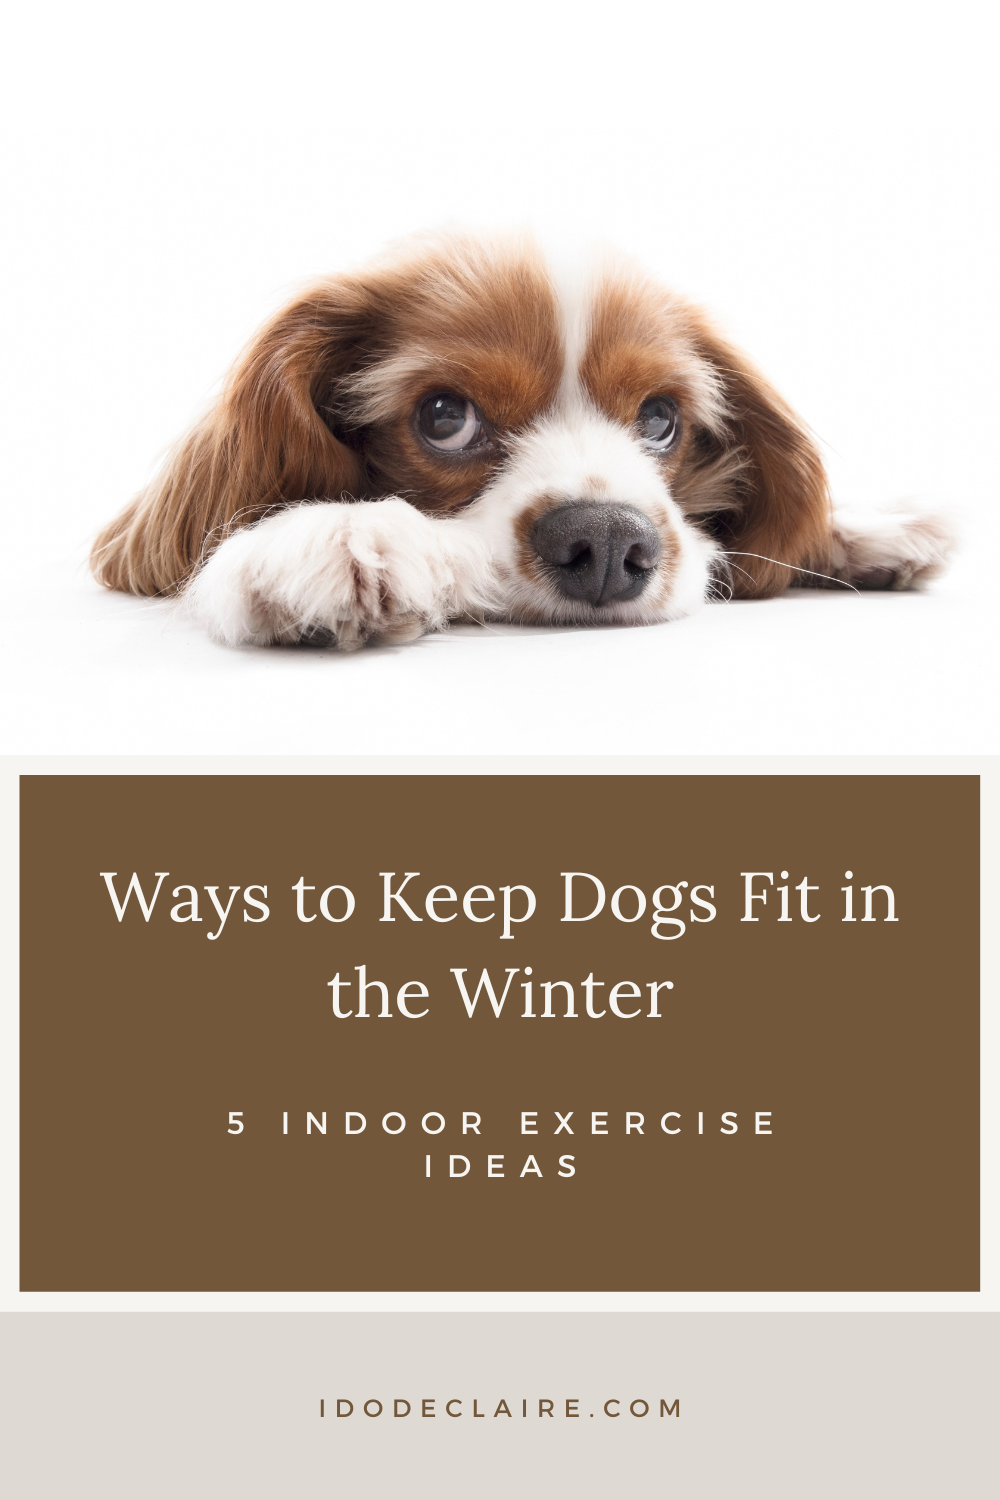 5 Indoor Exercises to Keep Dogs Fit in the Winter